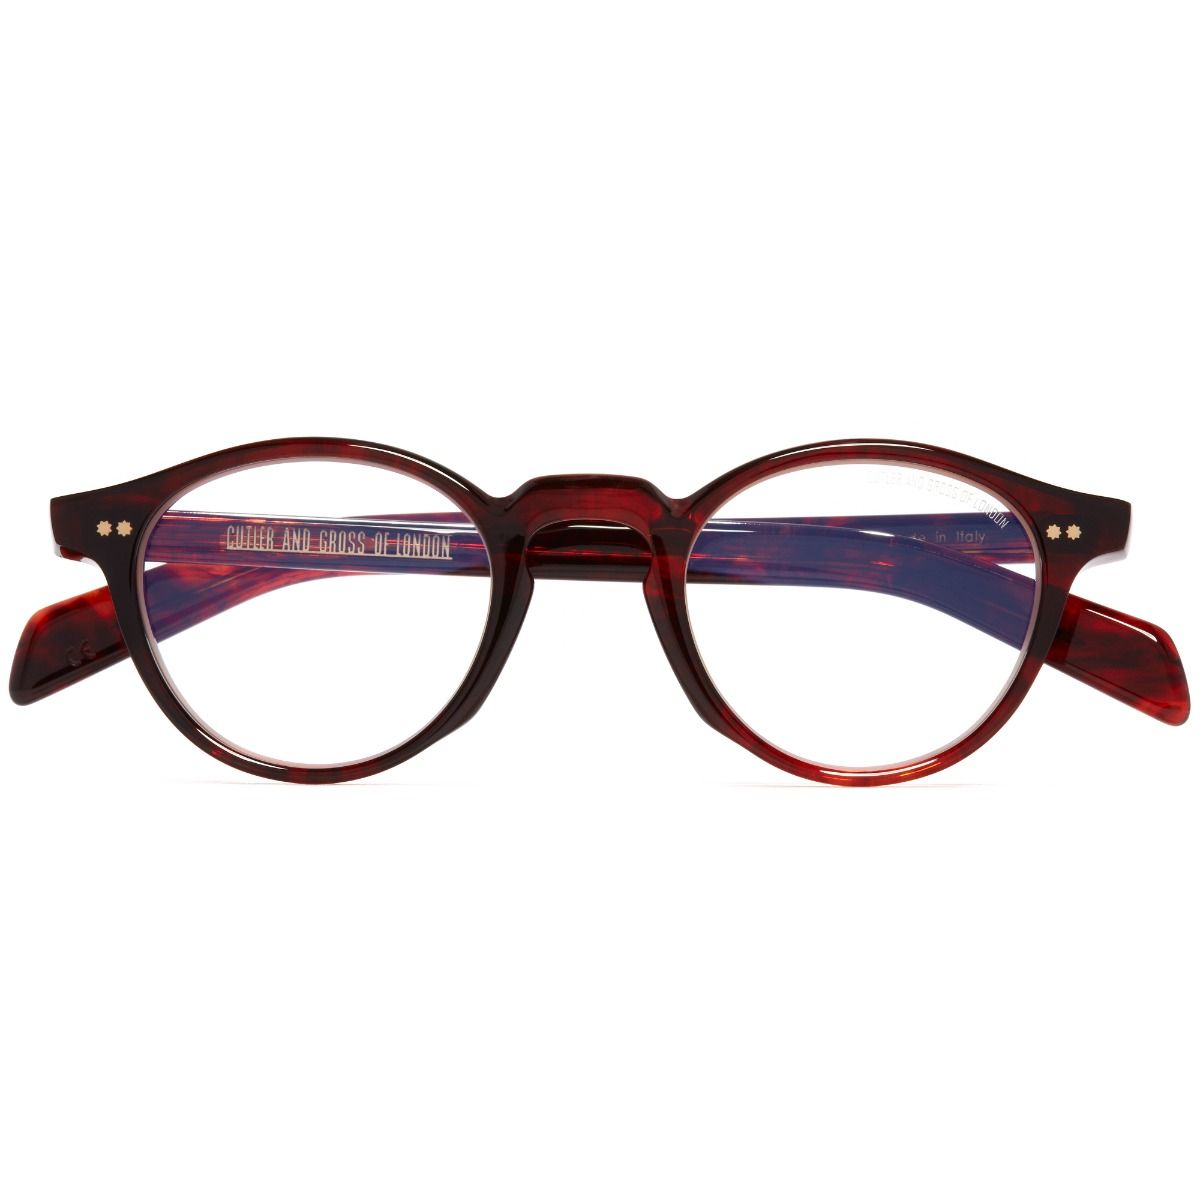 GR04 Round Optical Glasses - Red Havana by Cutler and Gross